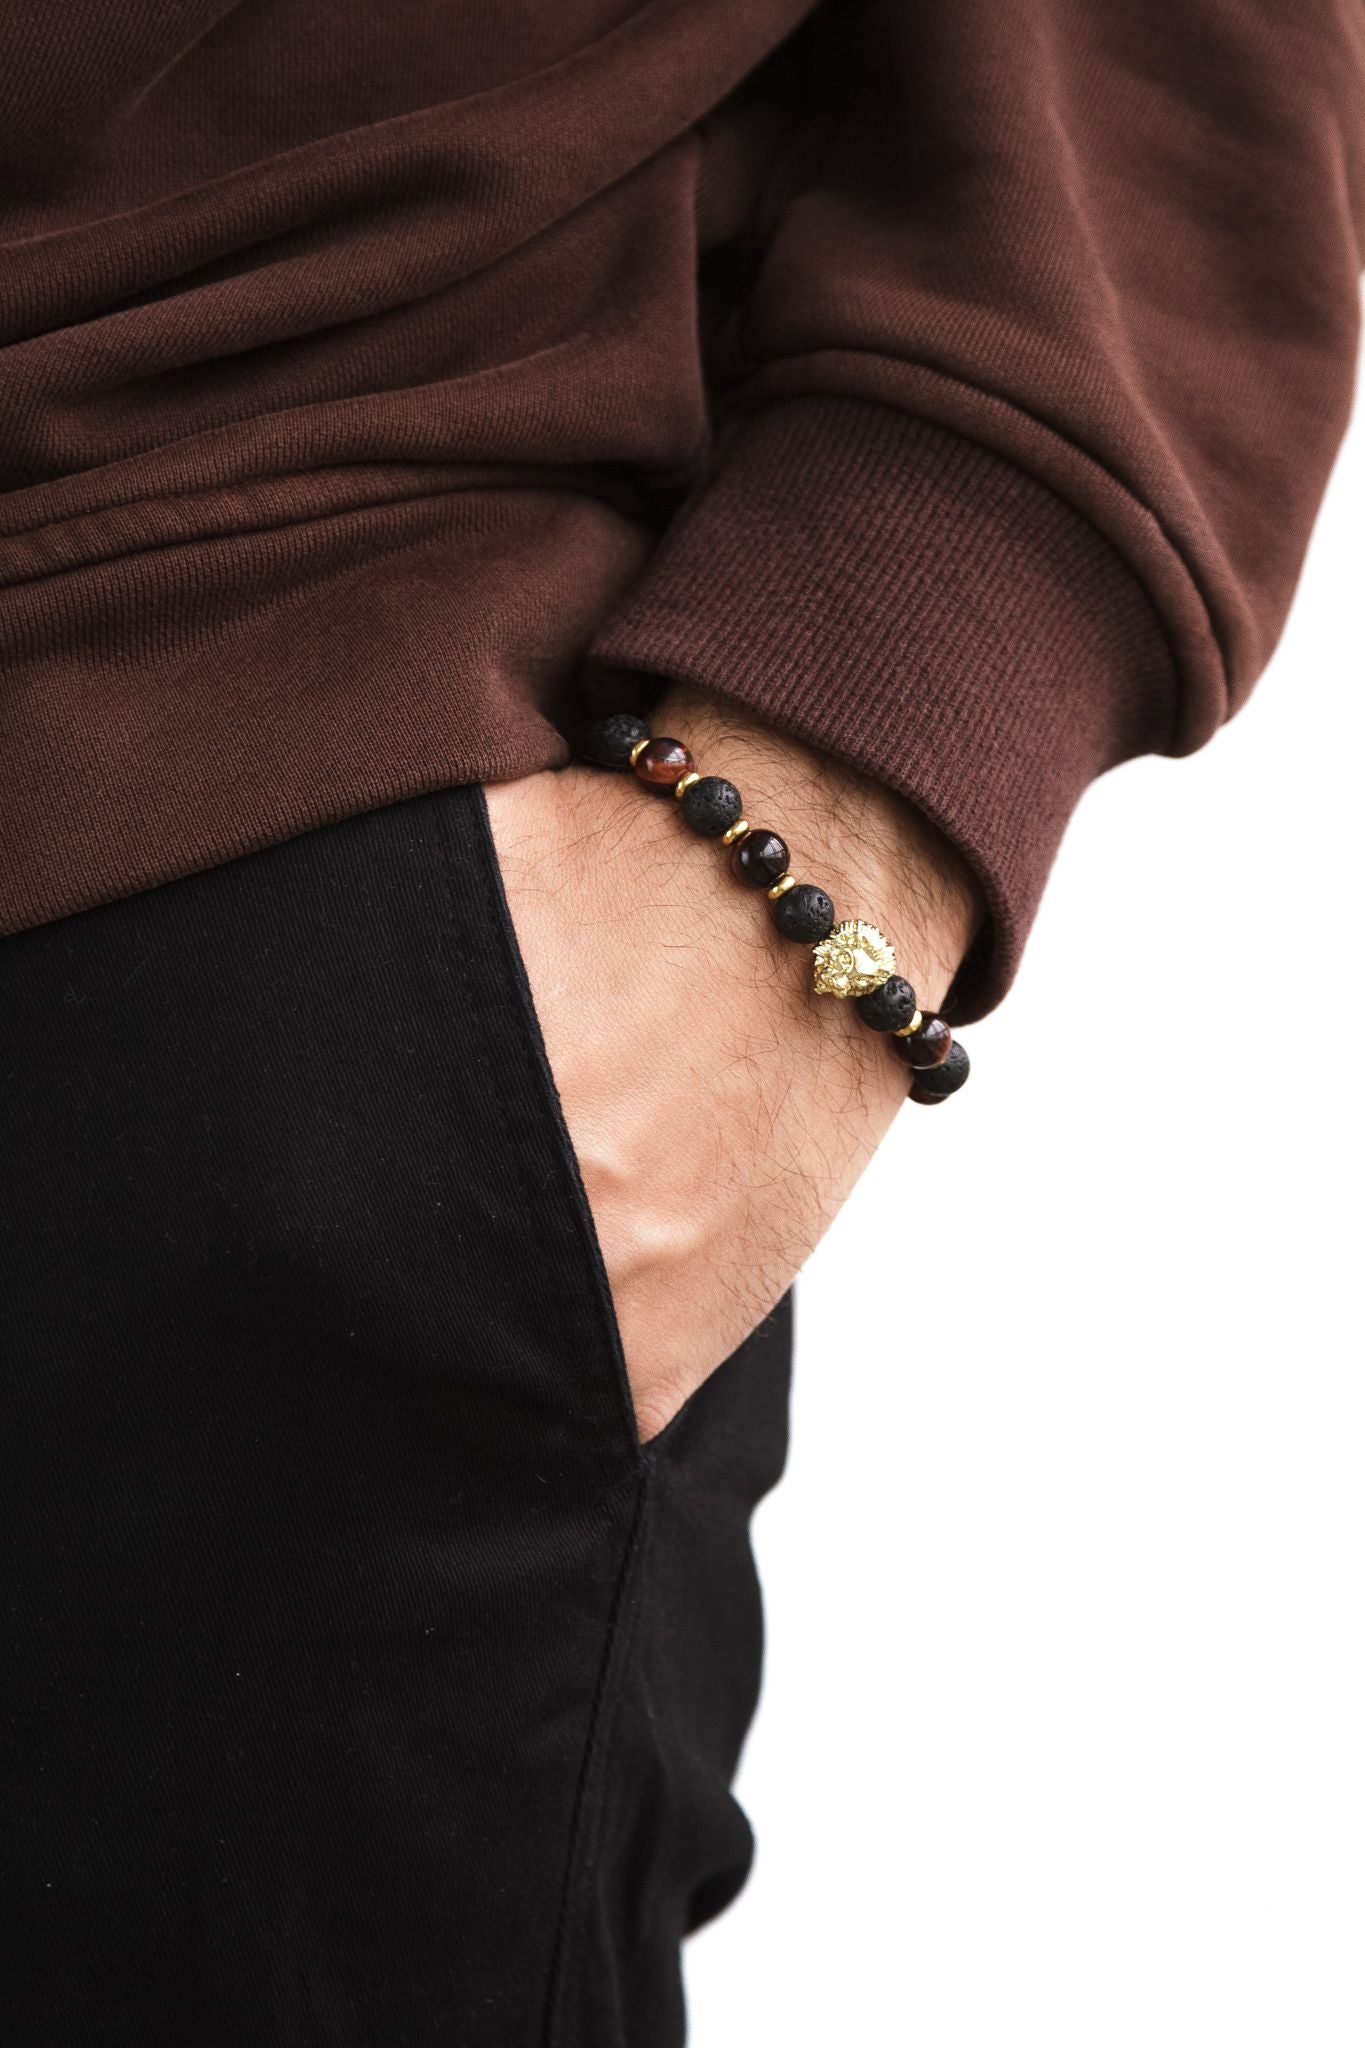 UNCOMMON Men's Beads Bracelet One Gold Lion Charm Onyx and Tiger-Eye Beads